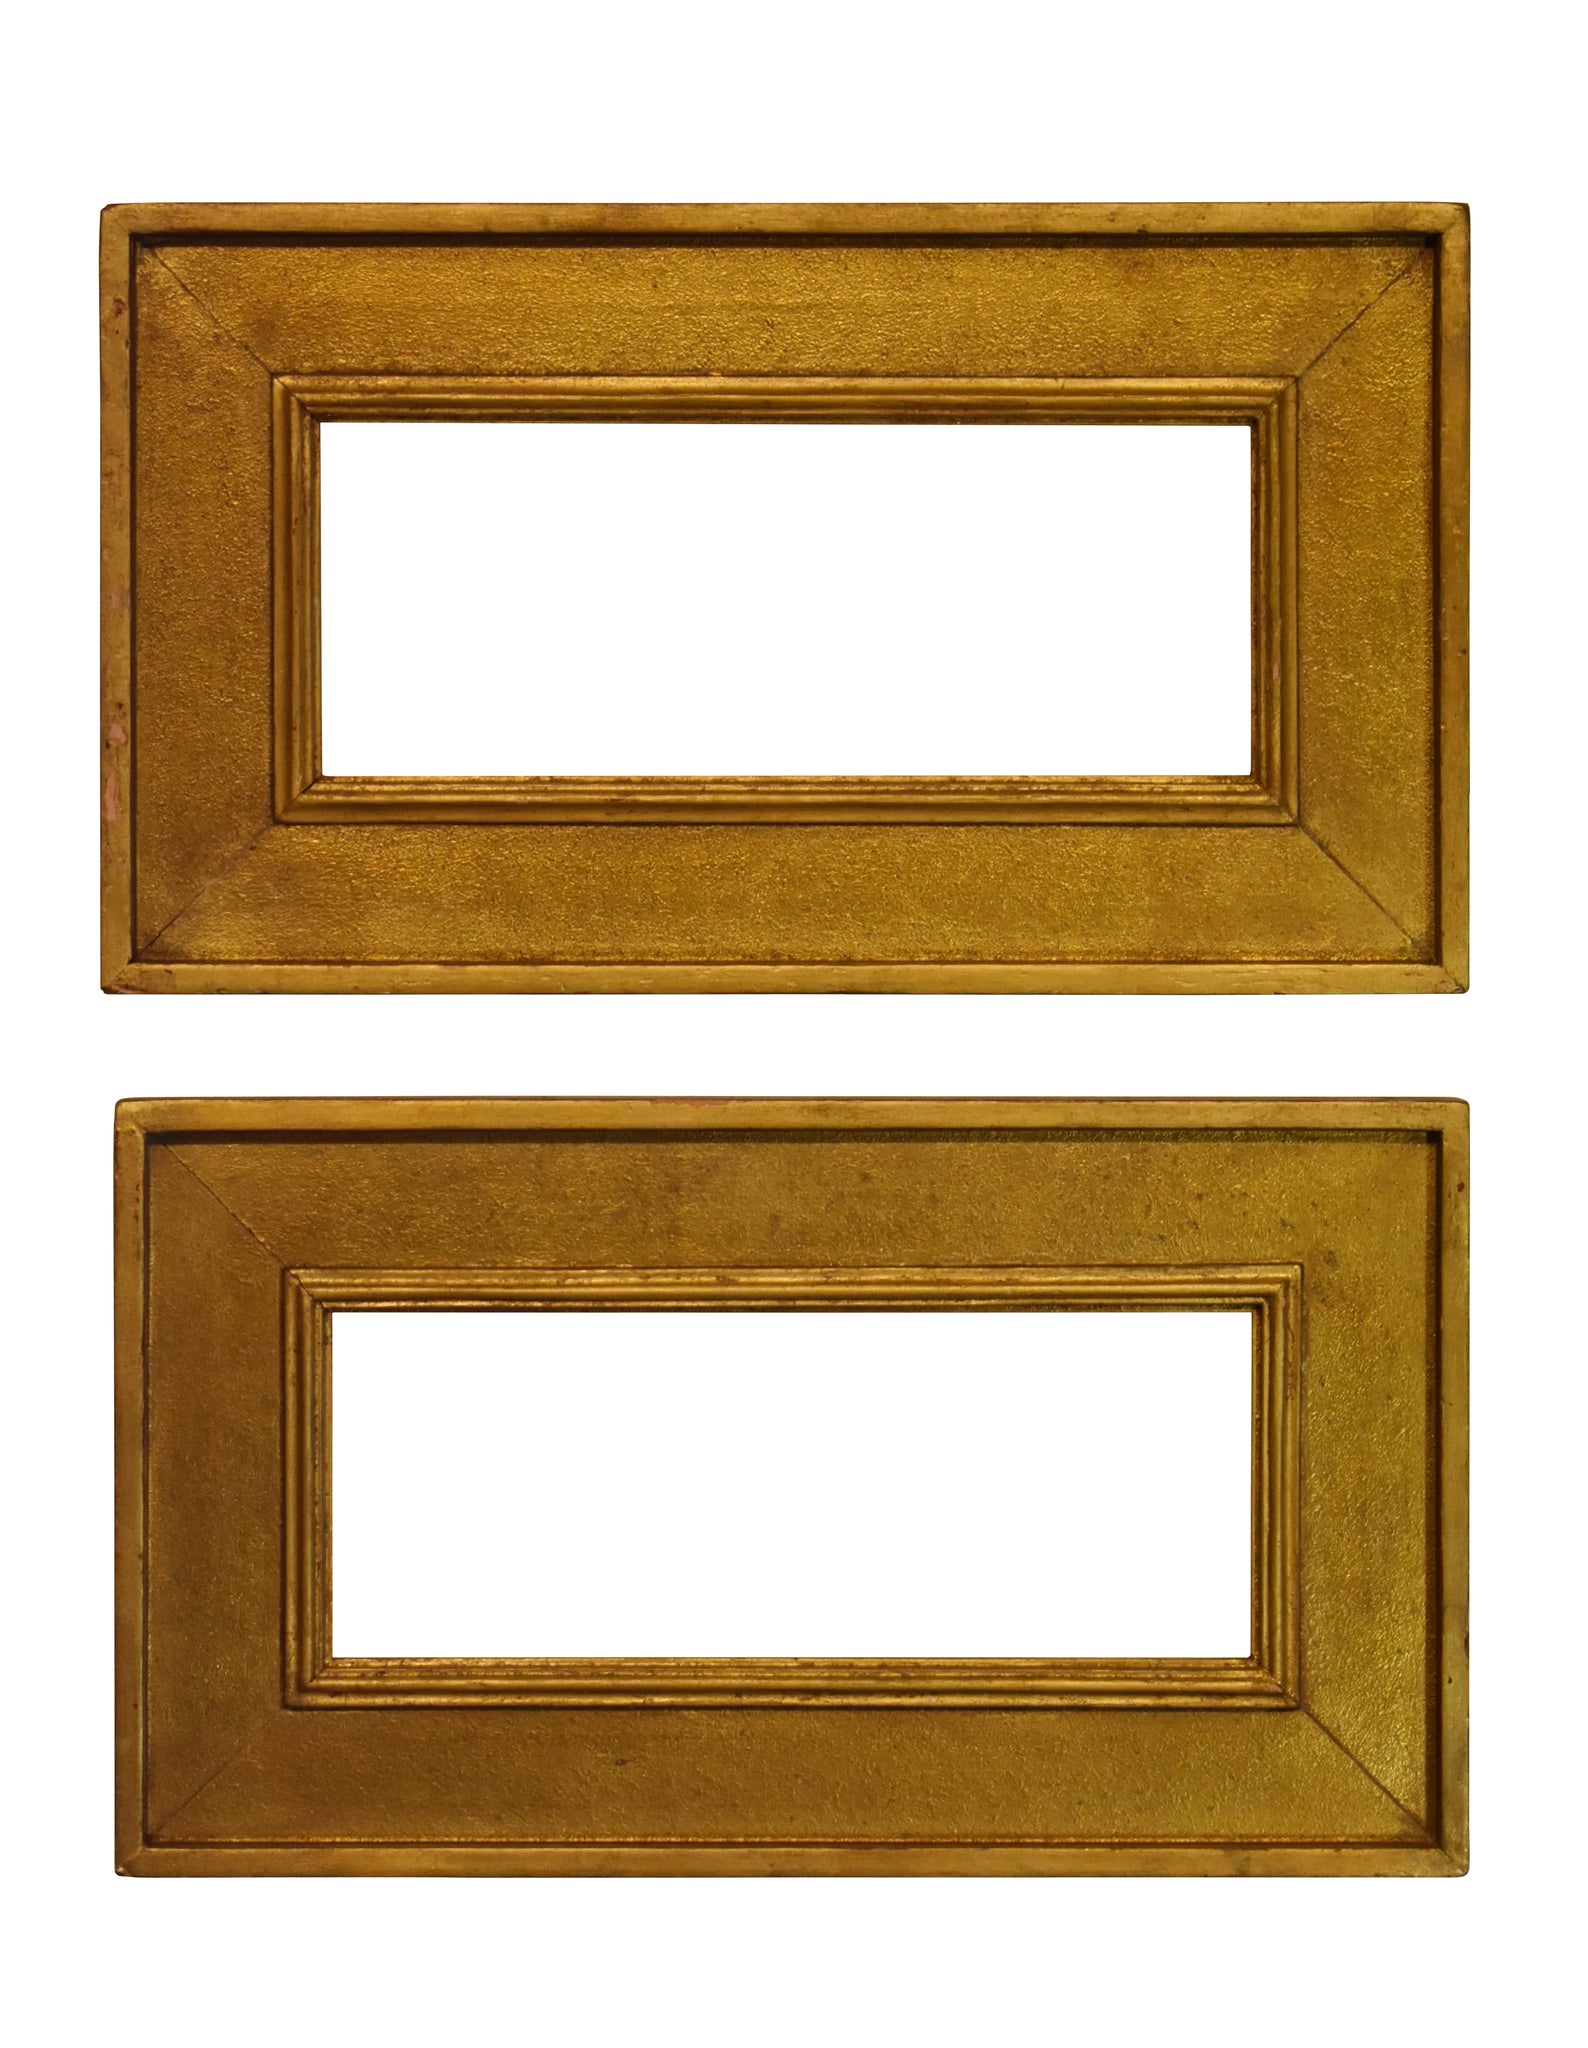 Pair of 4x11 Inch Antique American Gold Picture Frames for canvas art circa 1890 (19th Century).